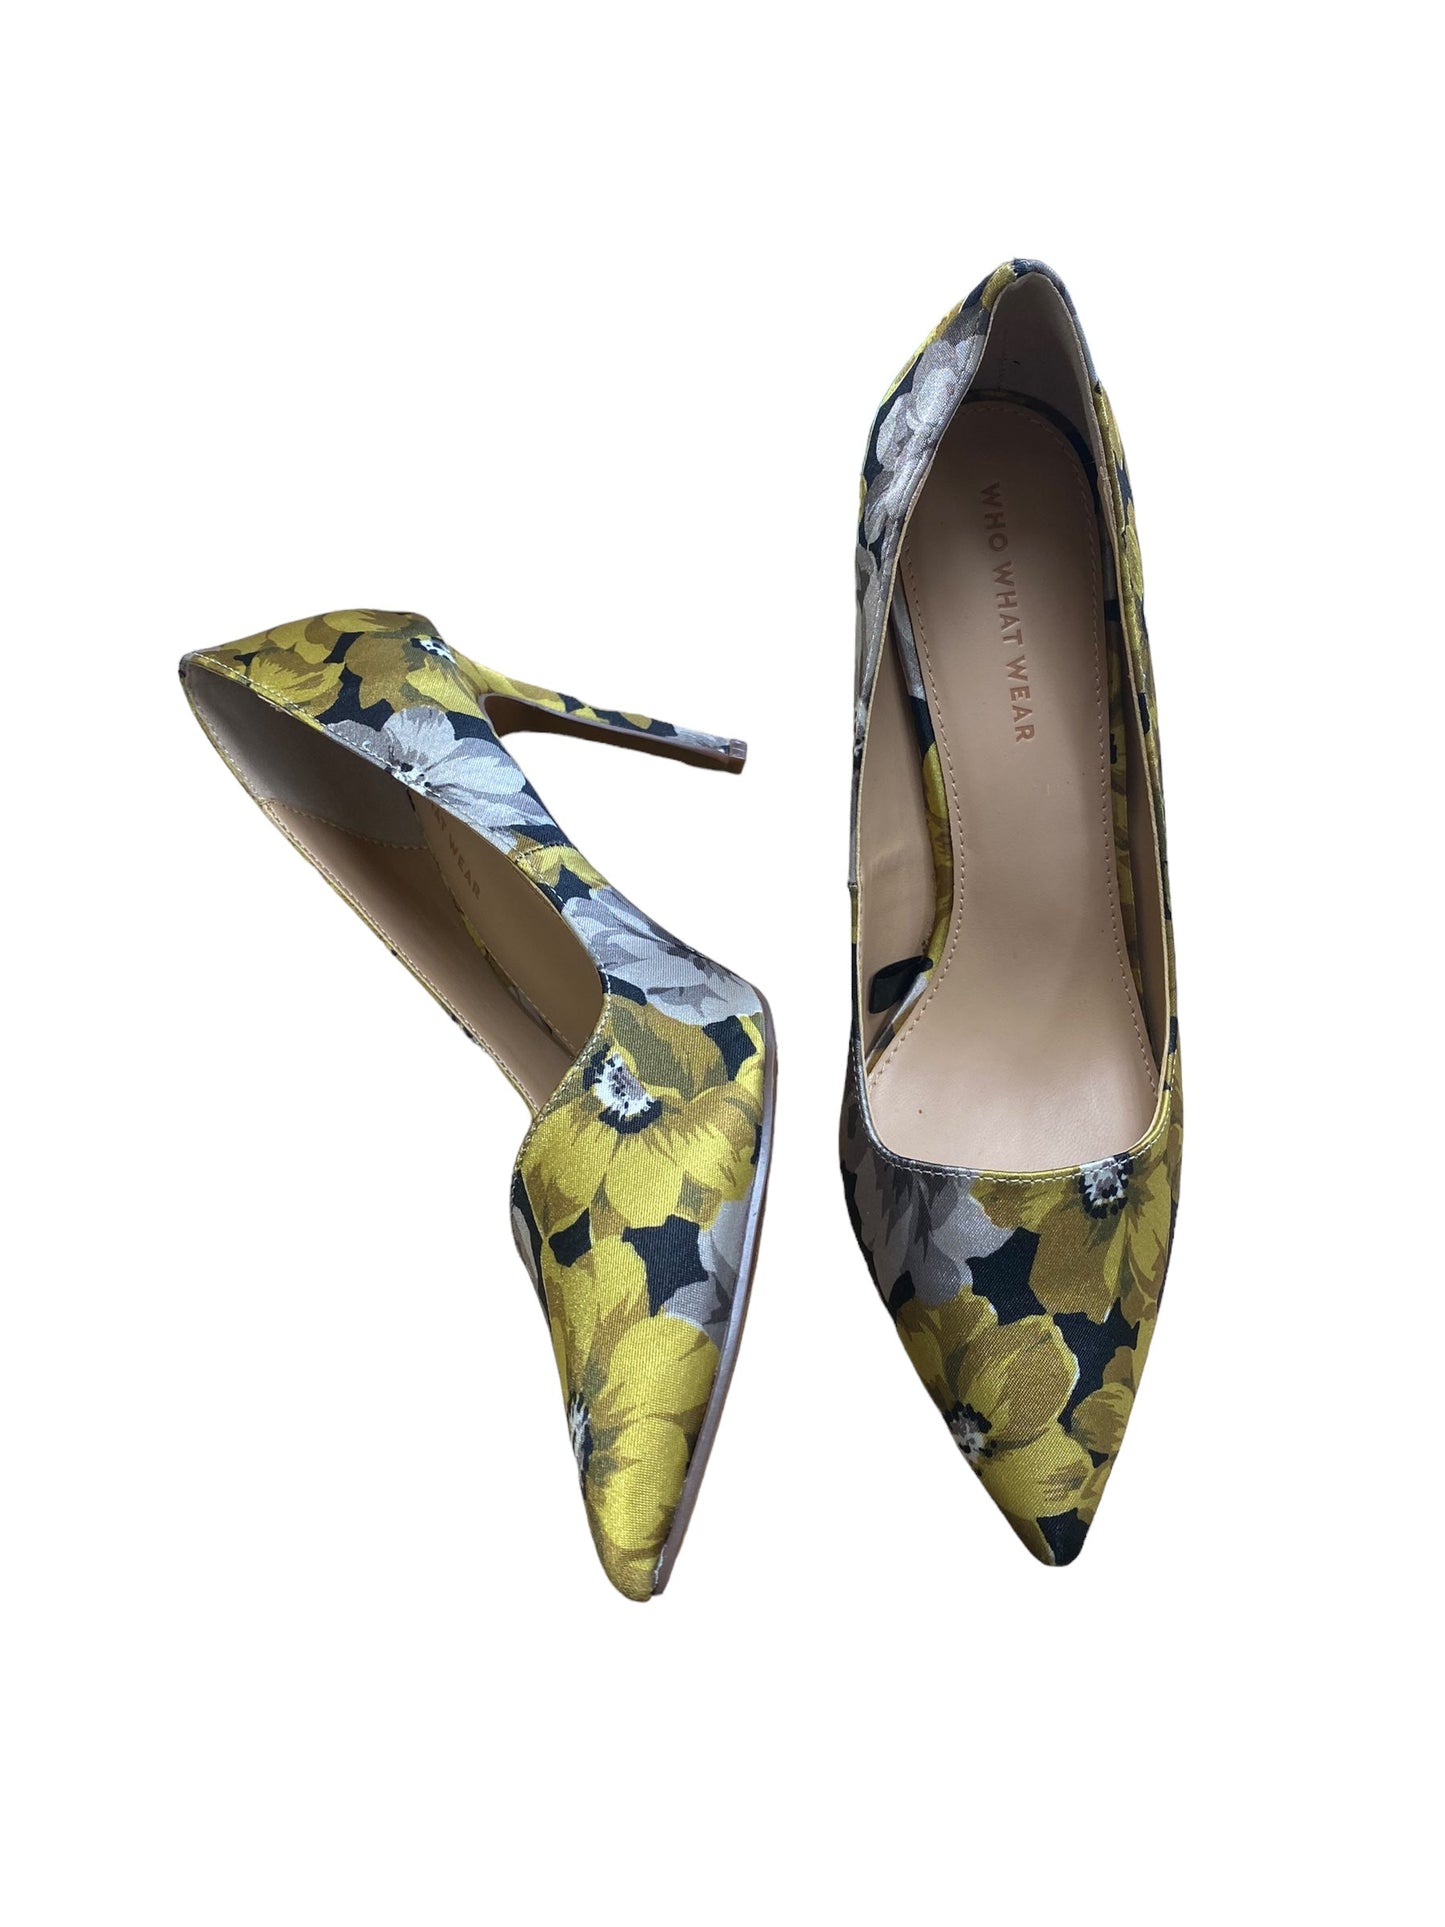 Floral Print Shoes Heels Stiletto Who What Wear, Size 8